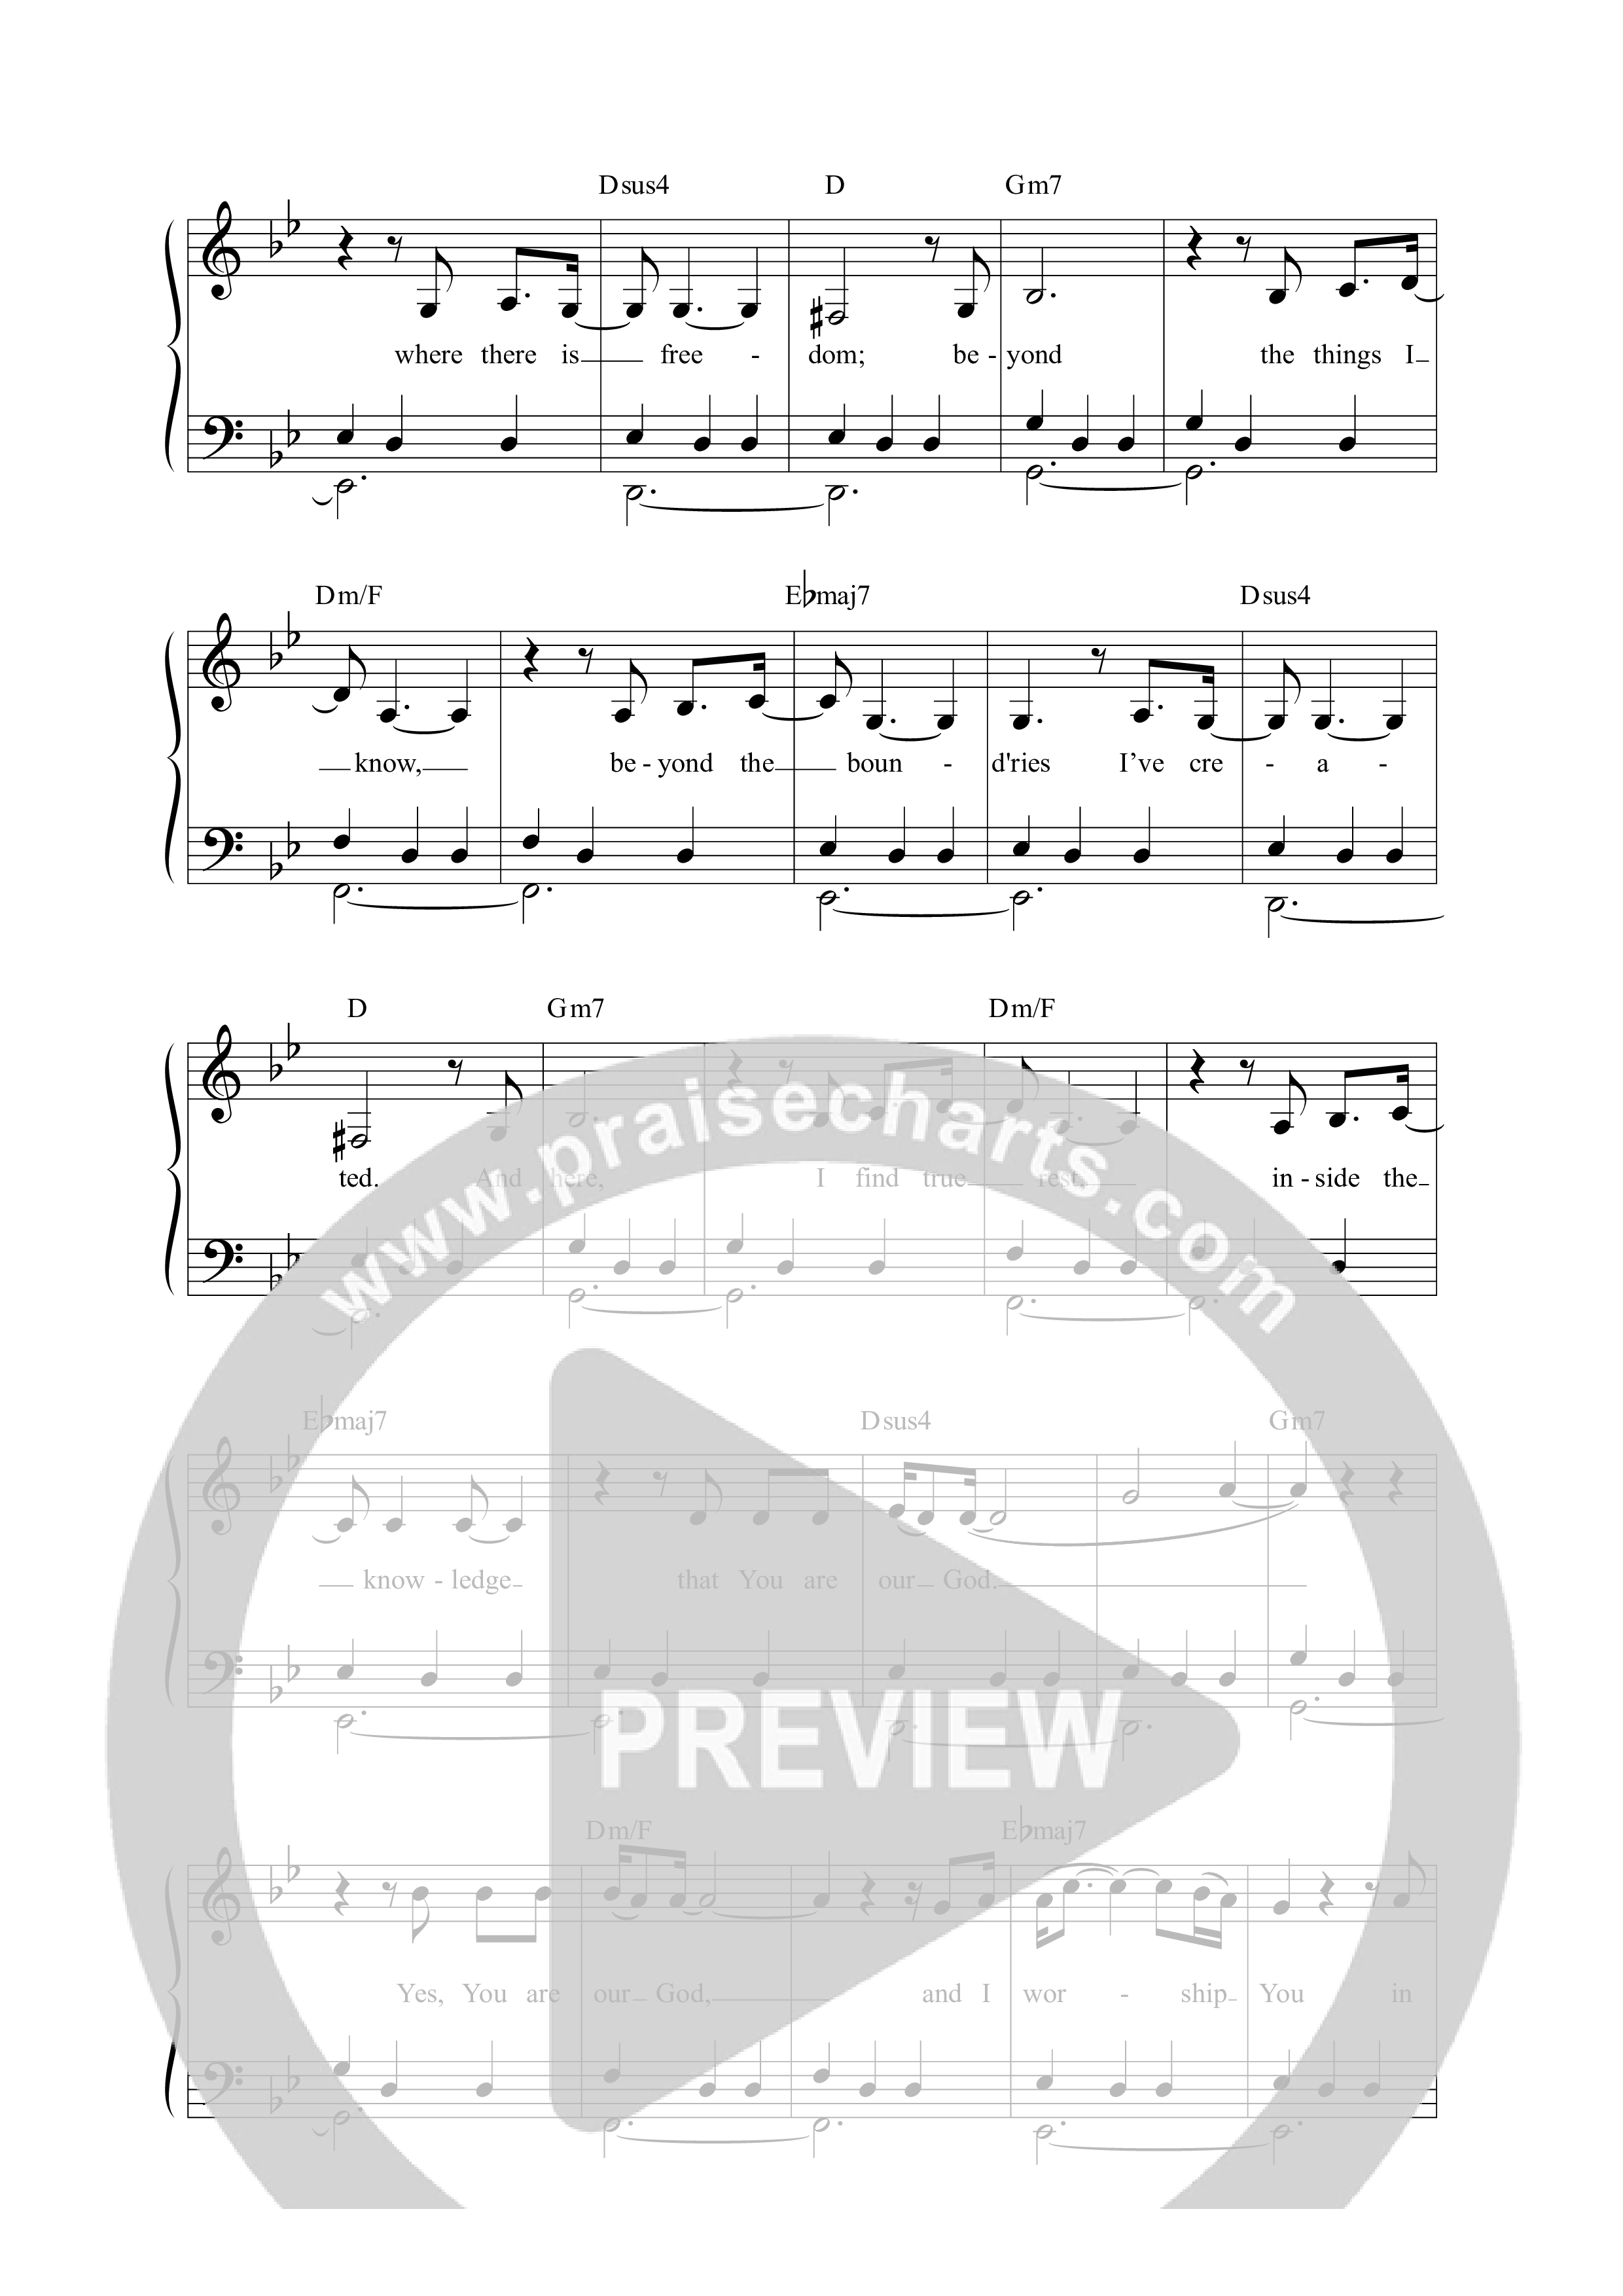 Spacious Place Lead Sheet Melody (Lucy Grimble)